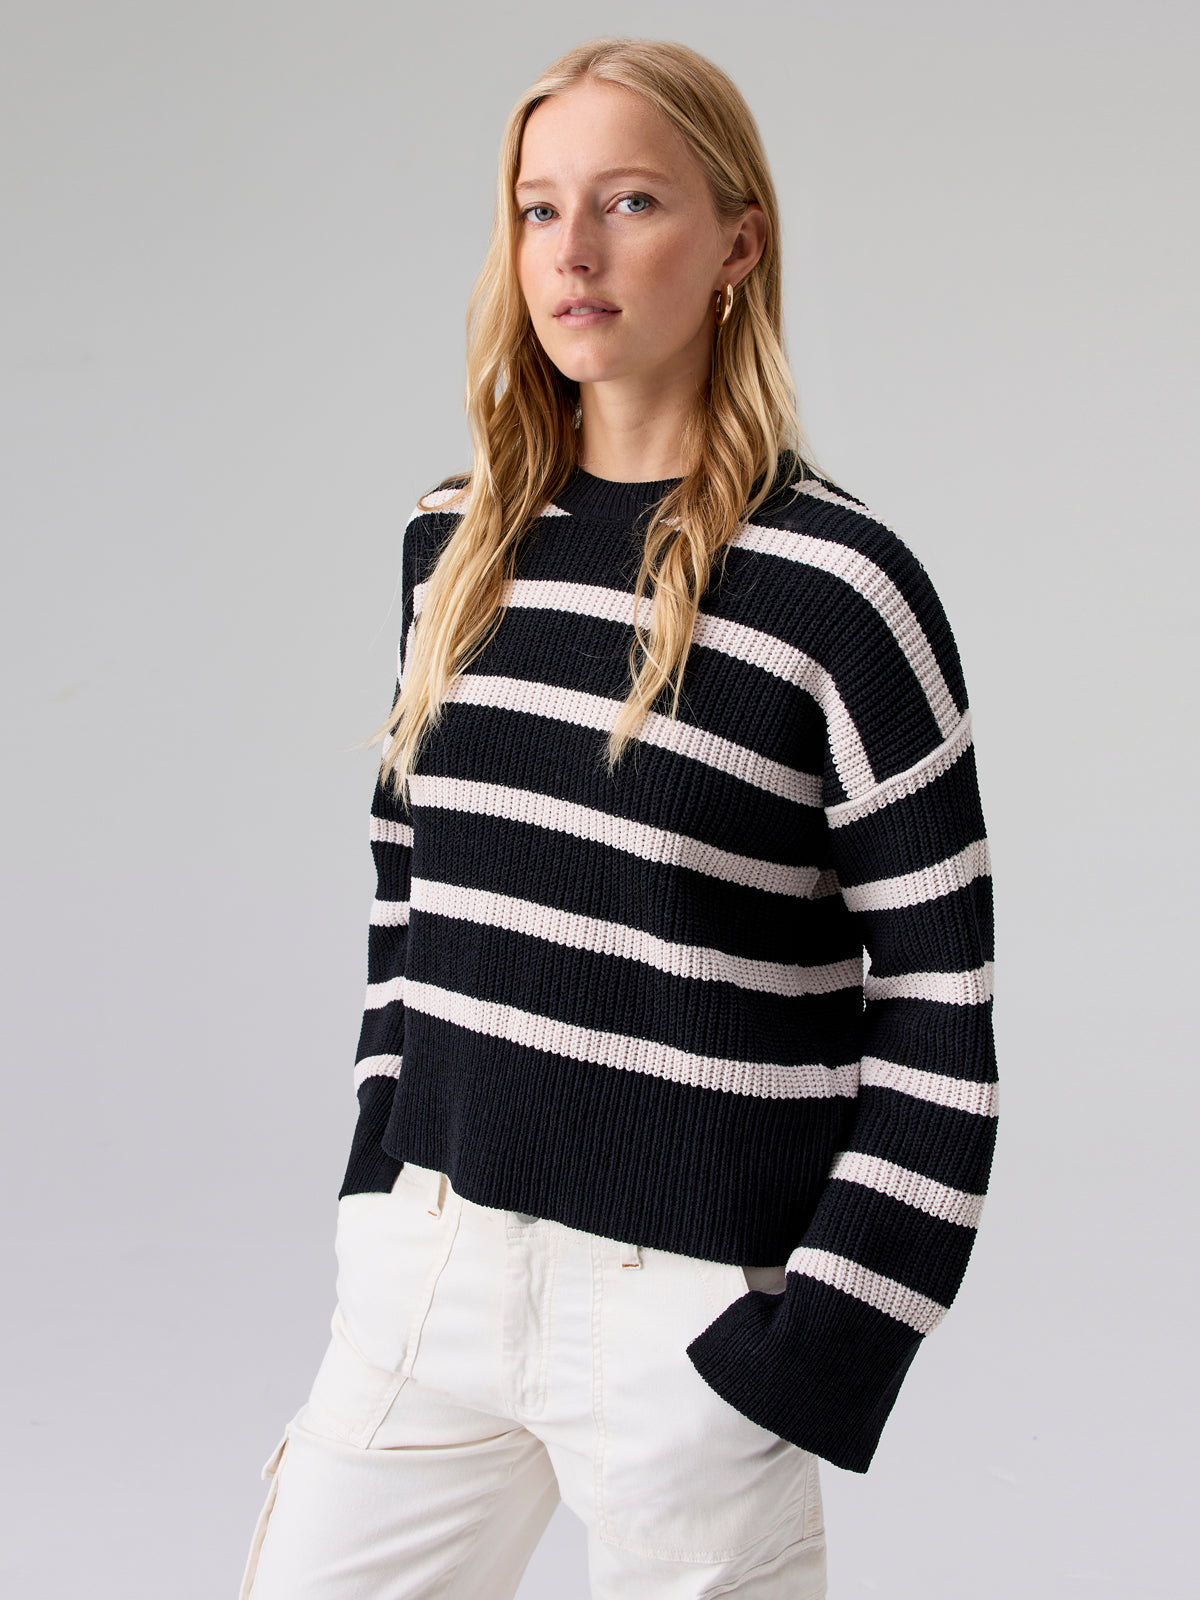 Sanctuary - Chilly Out Chenille Sweater / Black Toasted Stripe